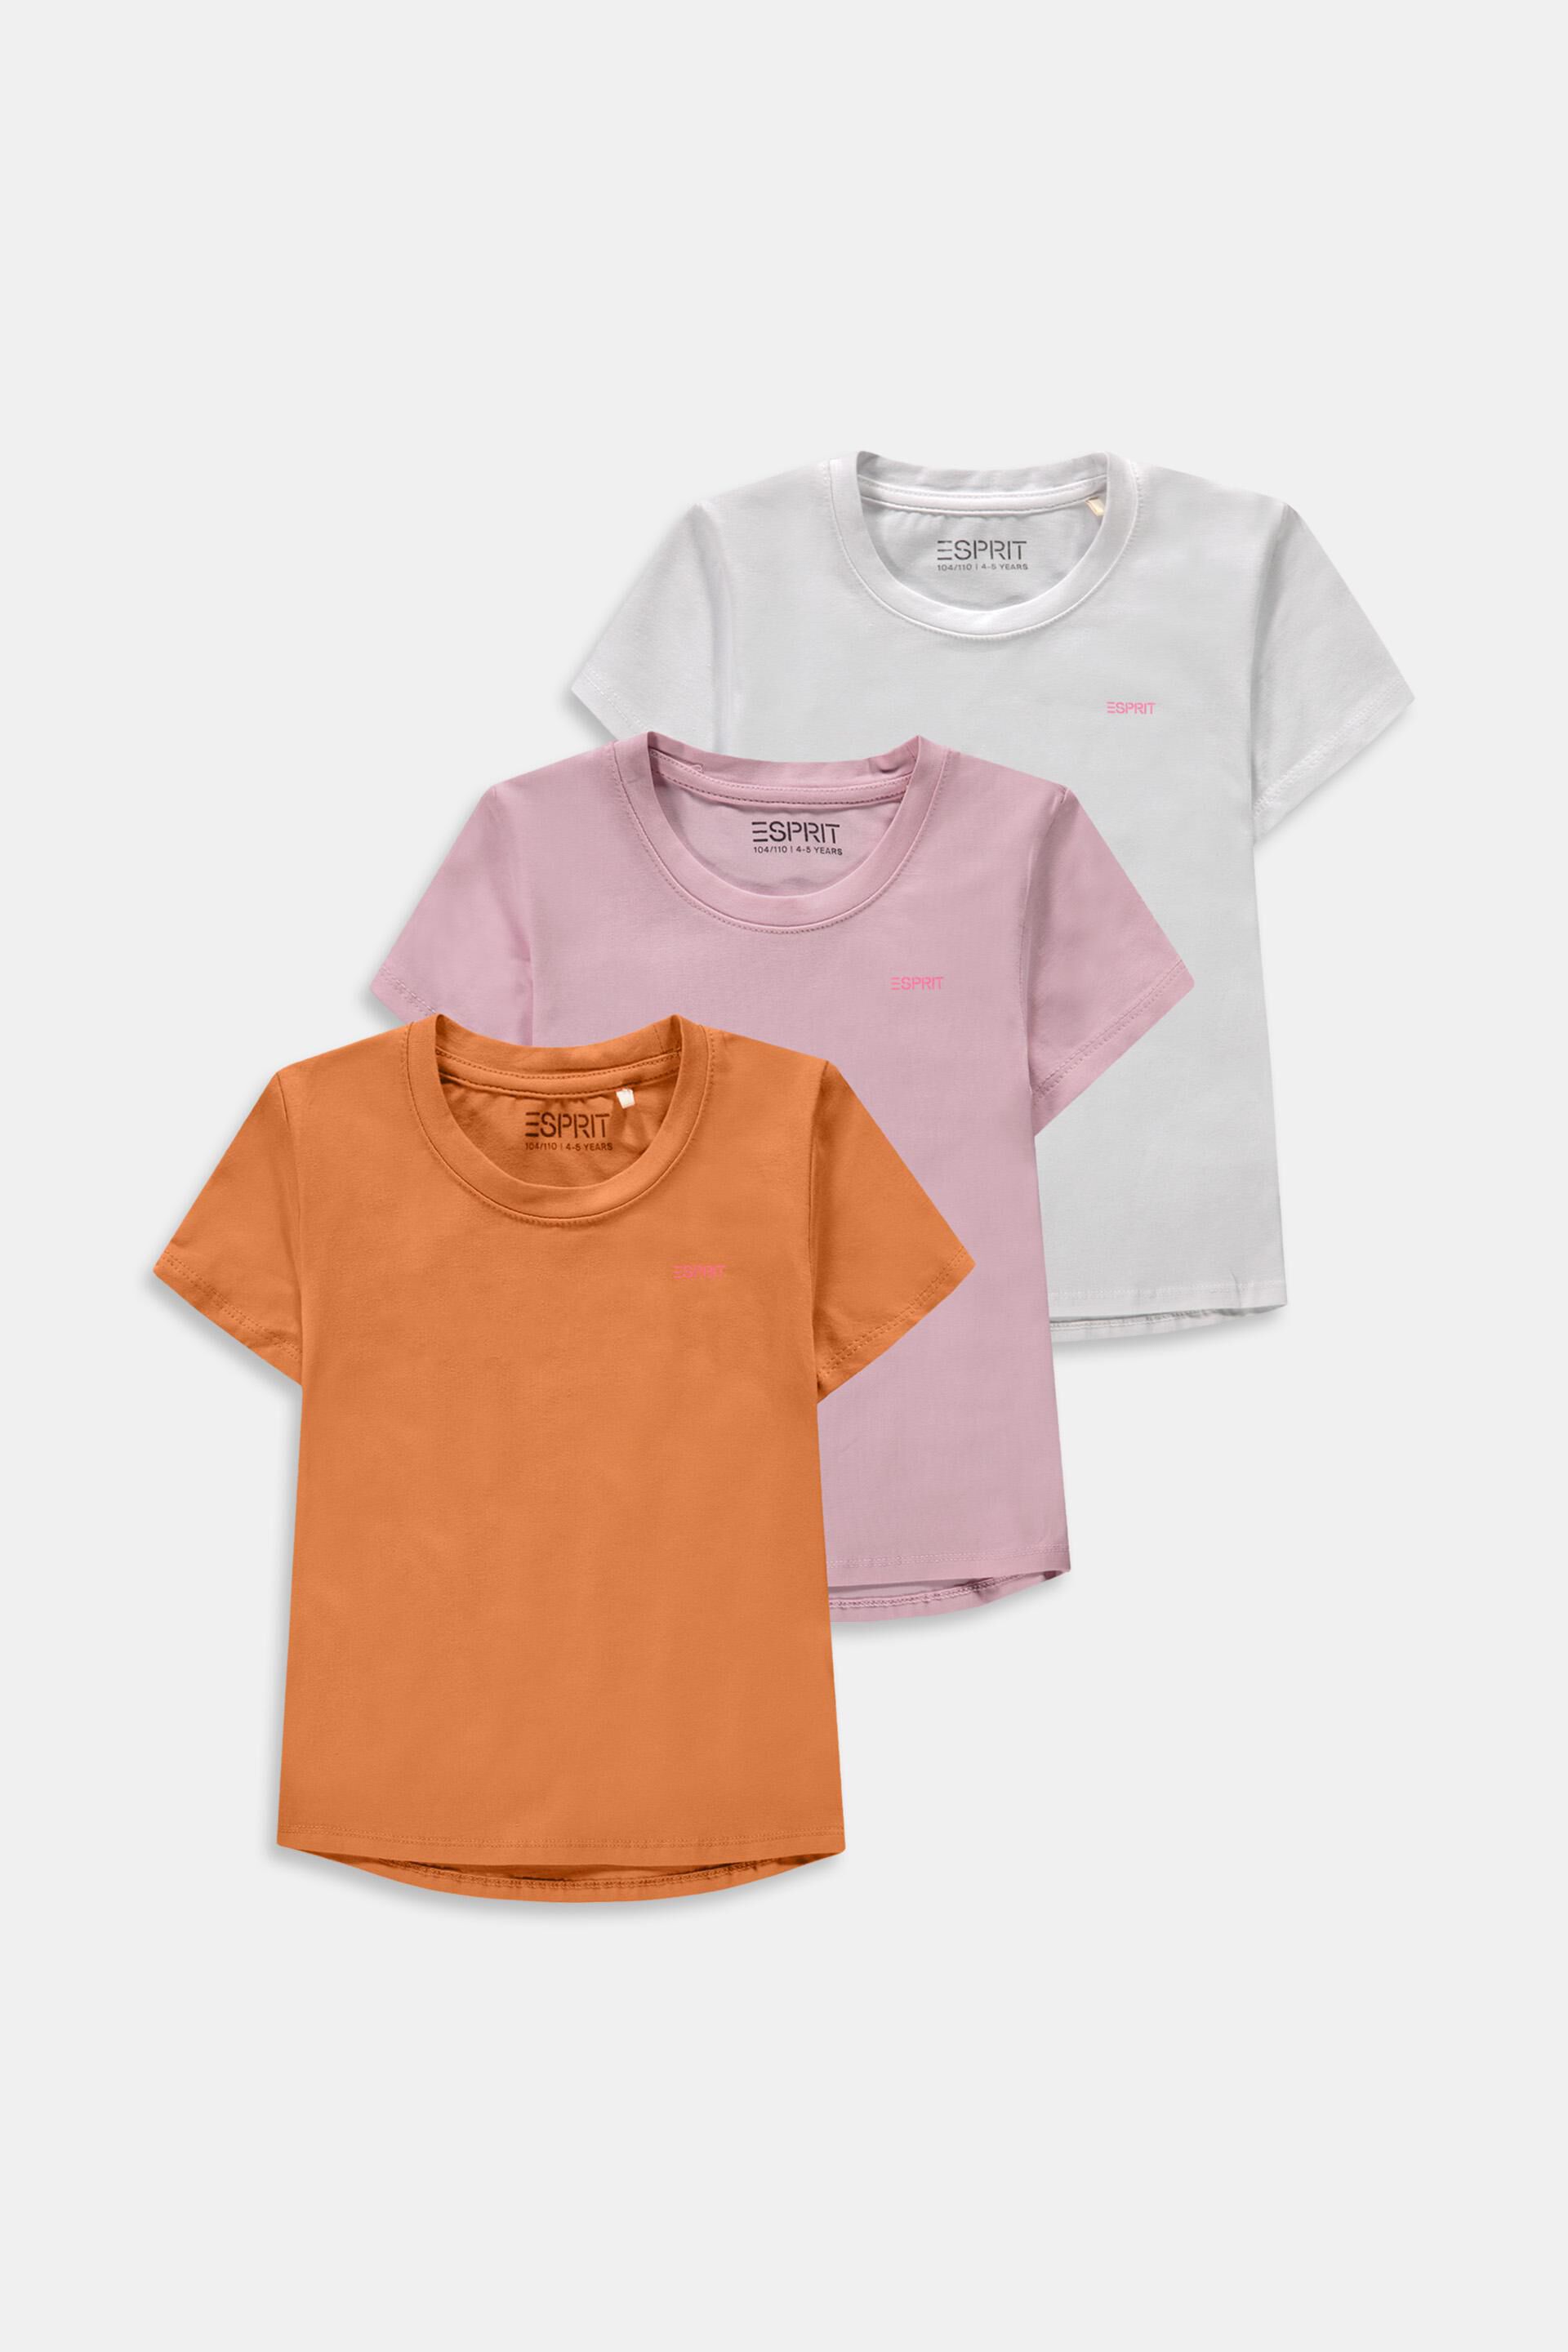 Esprit print t-shirts small of logo 3-pack